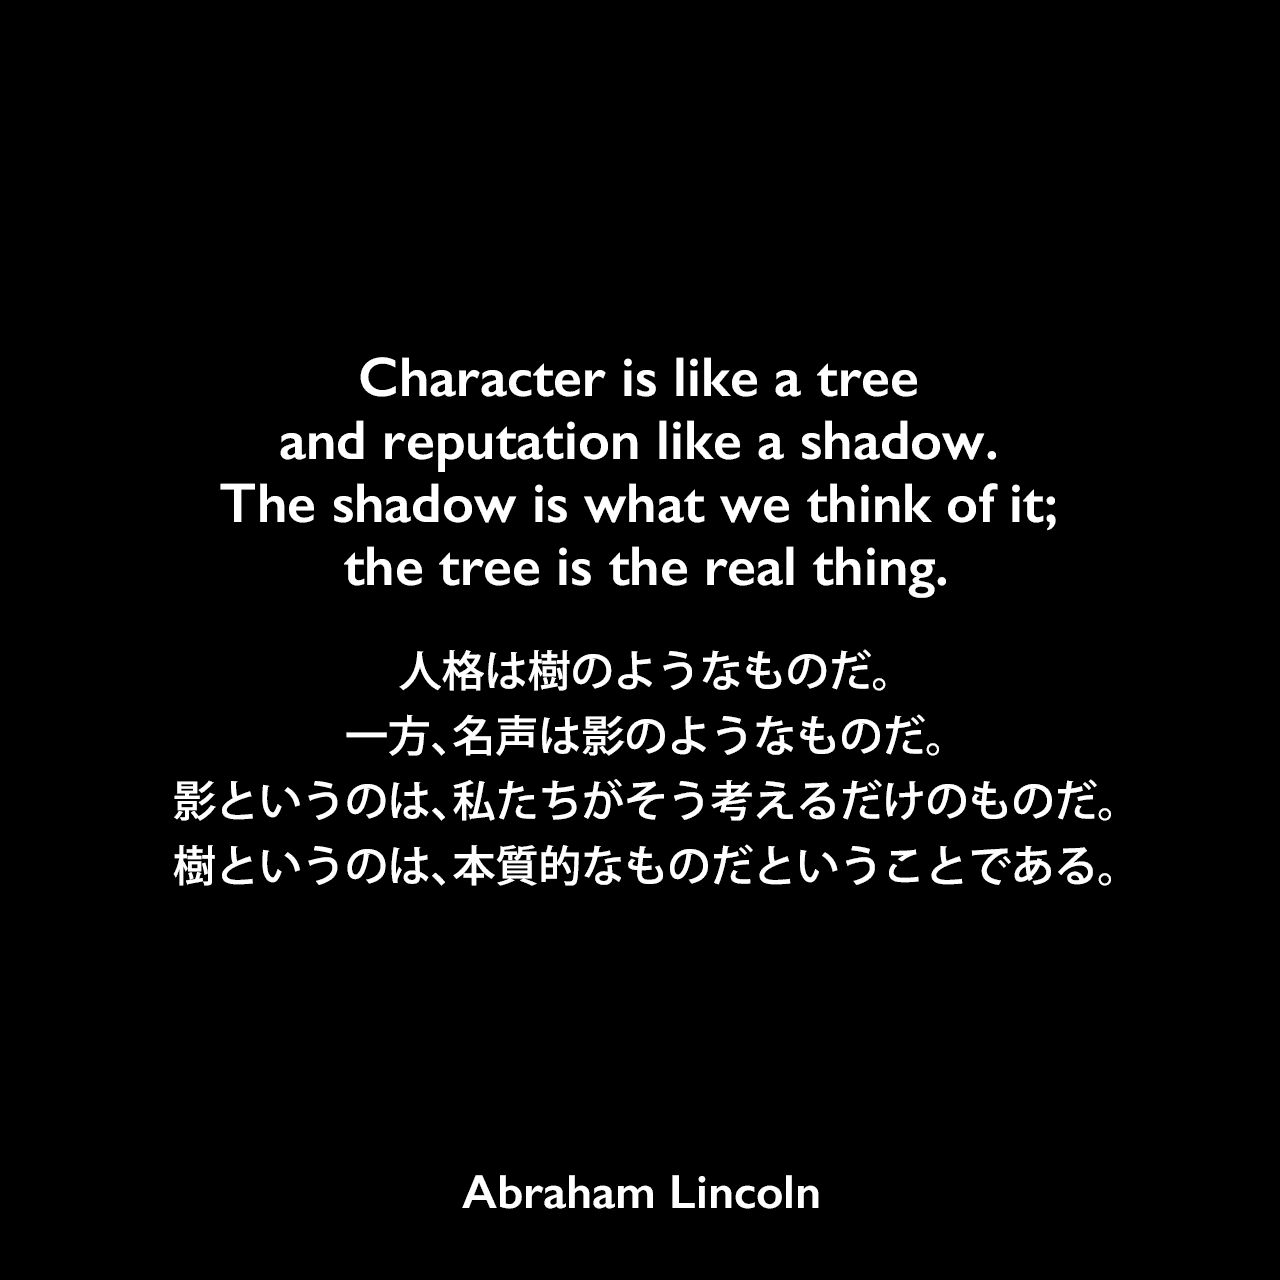 Character is like a tree and reputation like a shadow. The shadow is what we think of it; the tree is the real thing.人格は樹のようなものだ。一方、名声は影のようなものだ。影というのは、私たちがそう考えるだけのものだということだ。樹というのは、本質的なものだということである。Abraham Lincoln